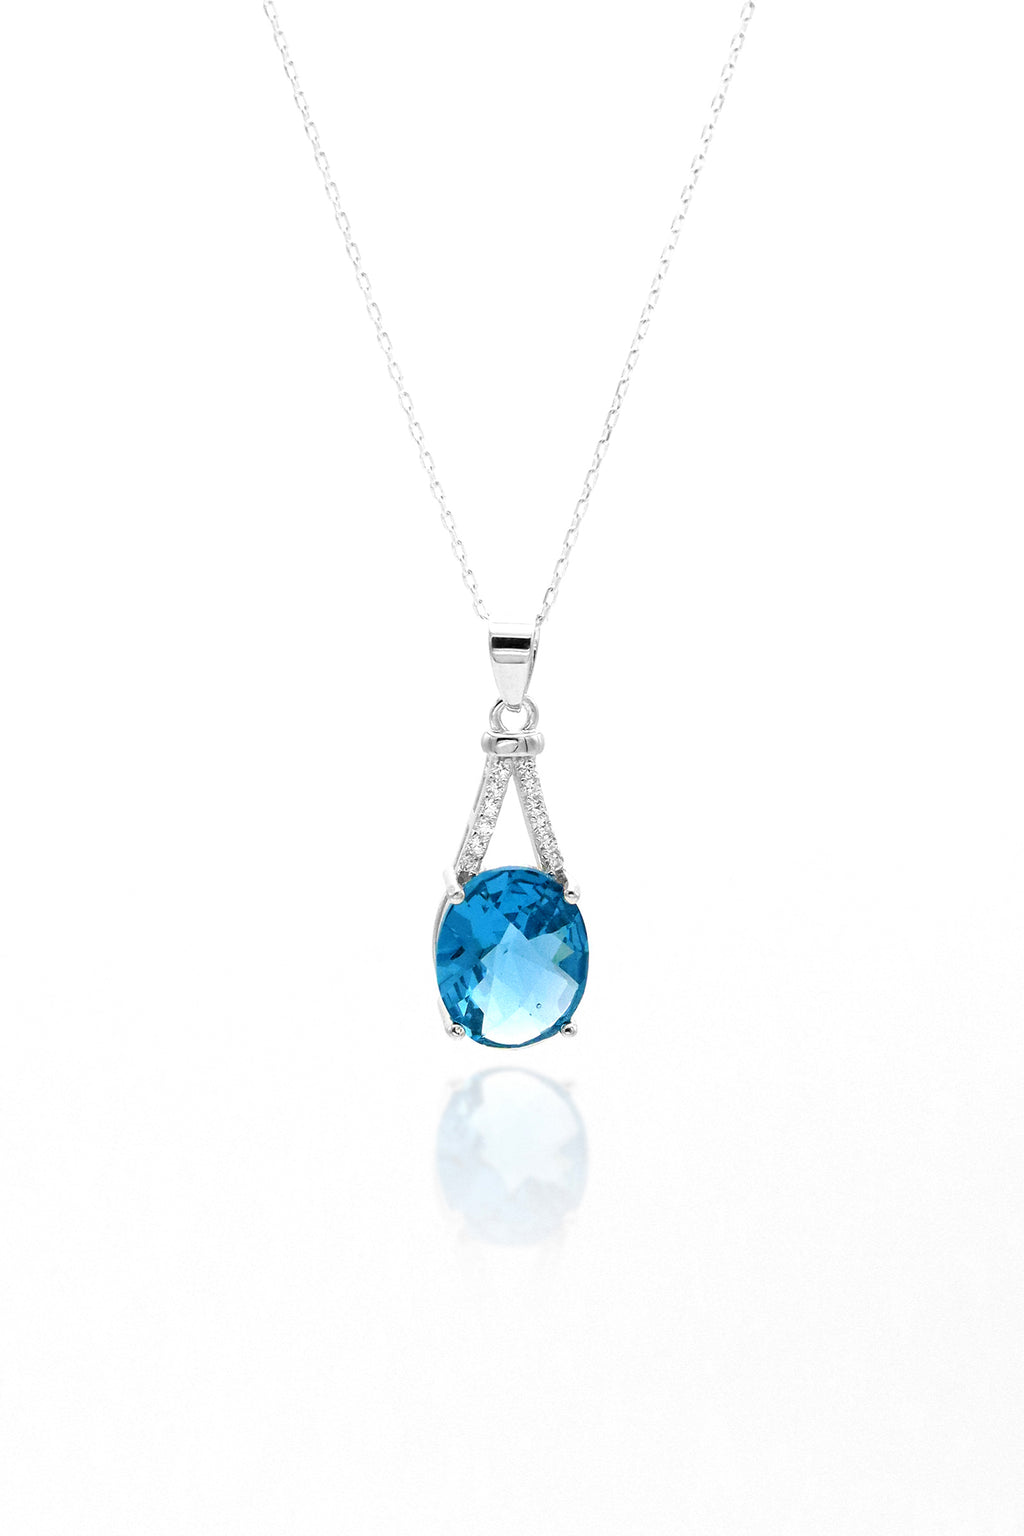 Authentic Handmade Silver Necklace With Aquamarine (NG201019521)